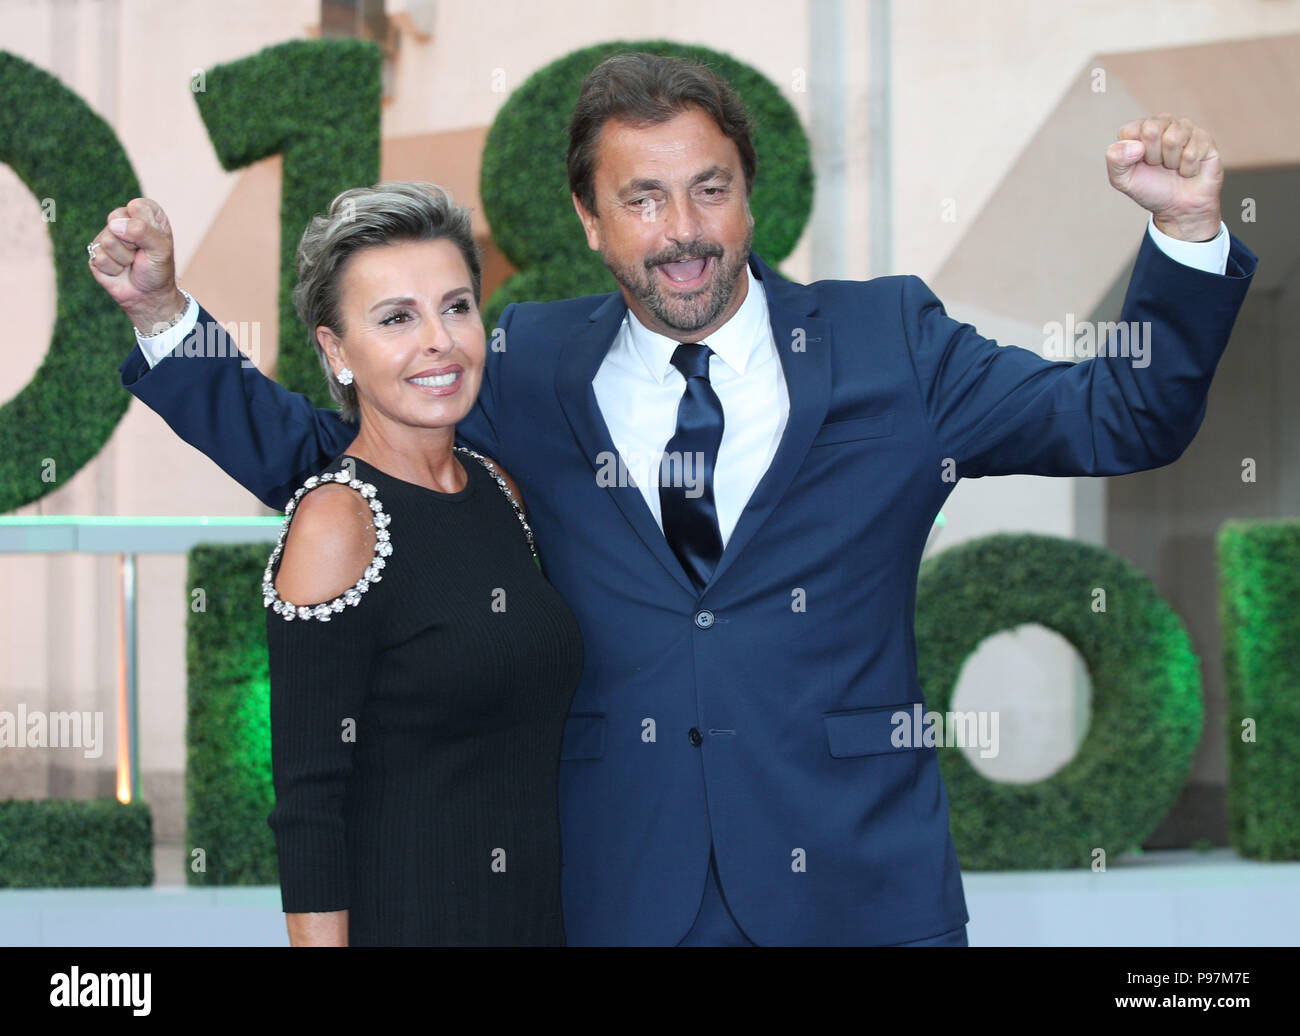 Henri leconte and florentine leconte hi-res stock photography and images -  Alamy